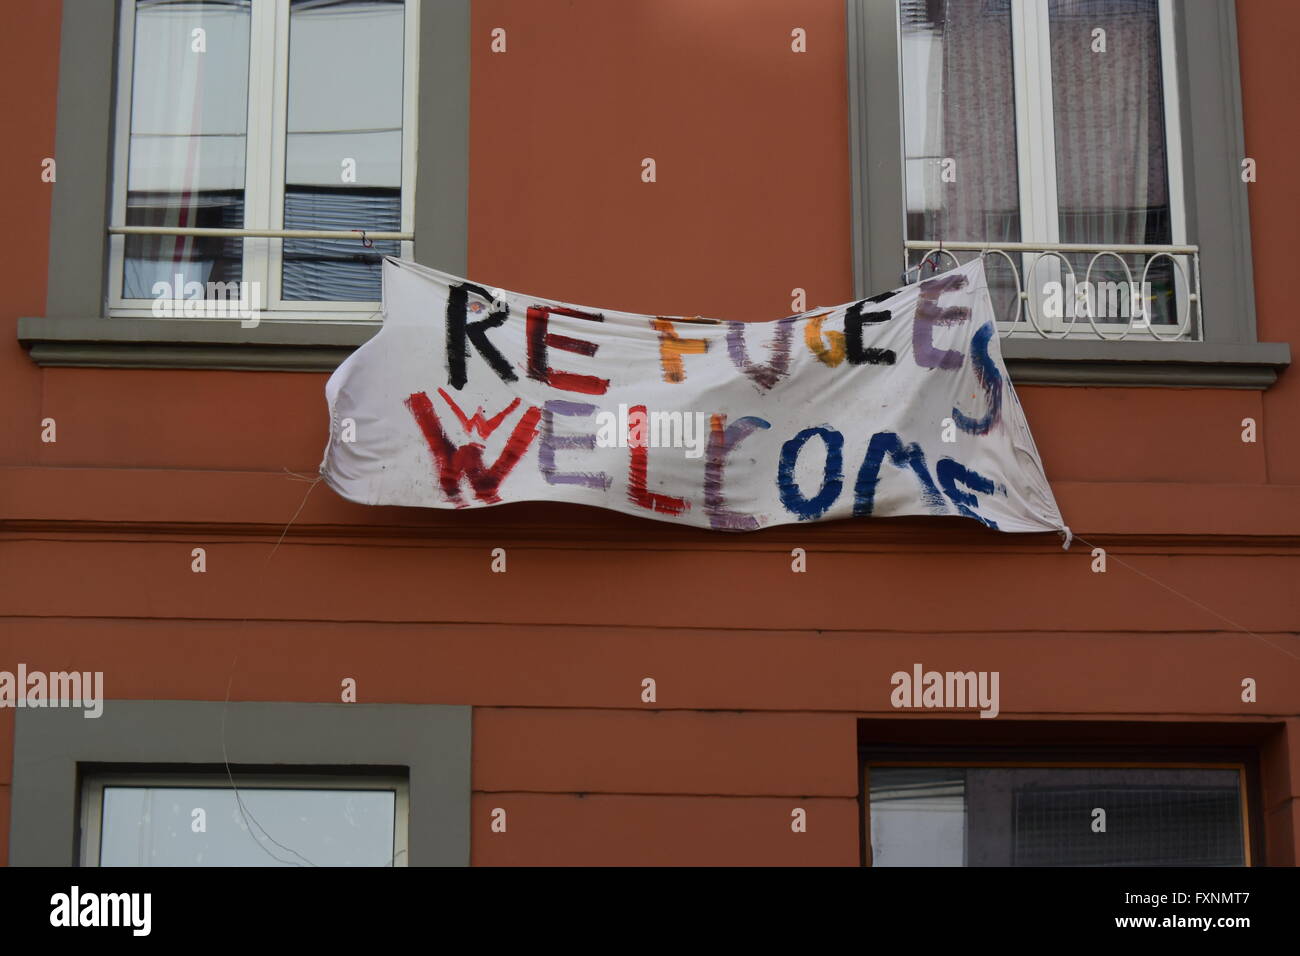 Refugees Welcome poster at a building in Bonn, Germany Stock Photo